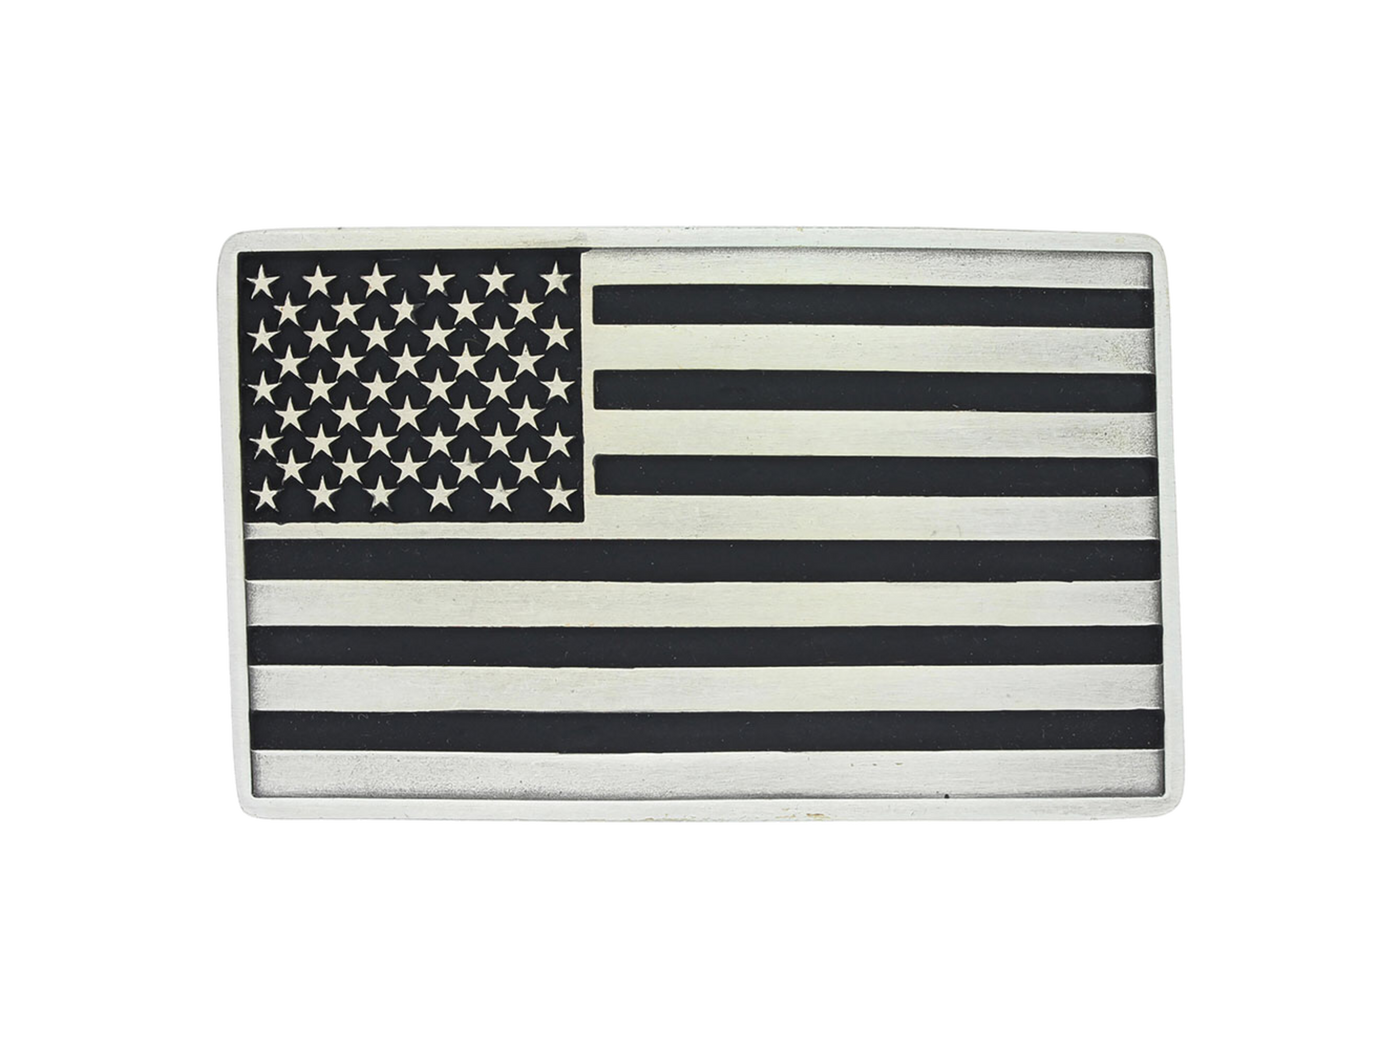 An antiqued silver tone rectangular Attitude buckle with a design of the American Flag. Standard 1.5 belt swivel.